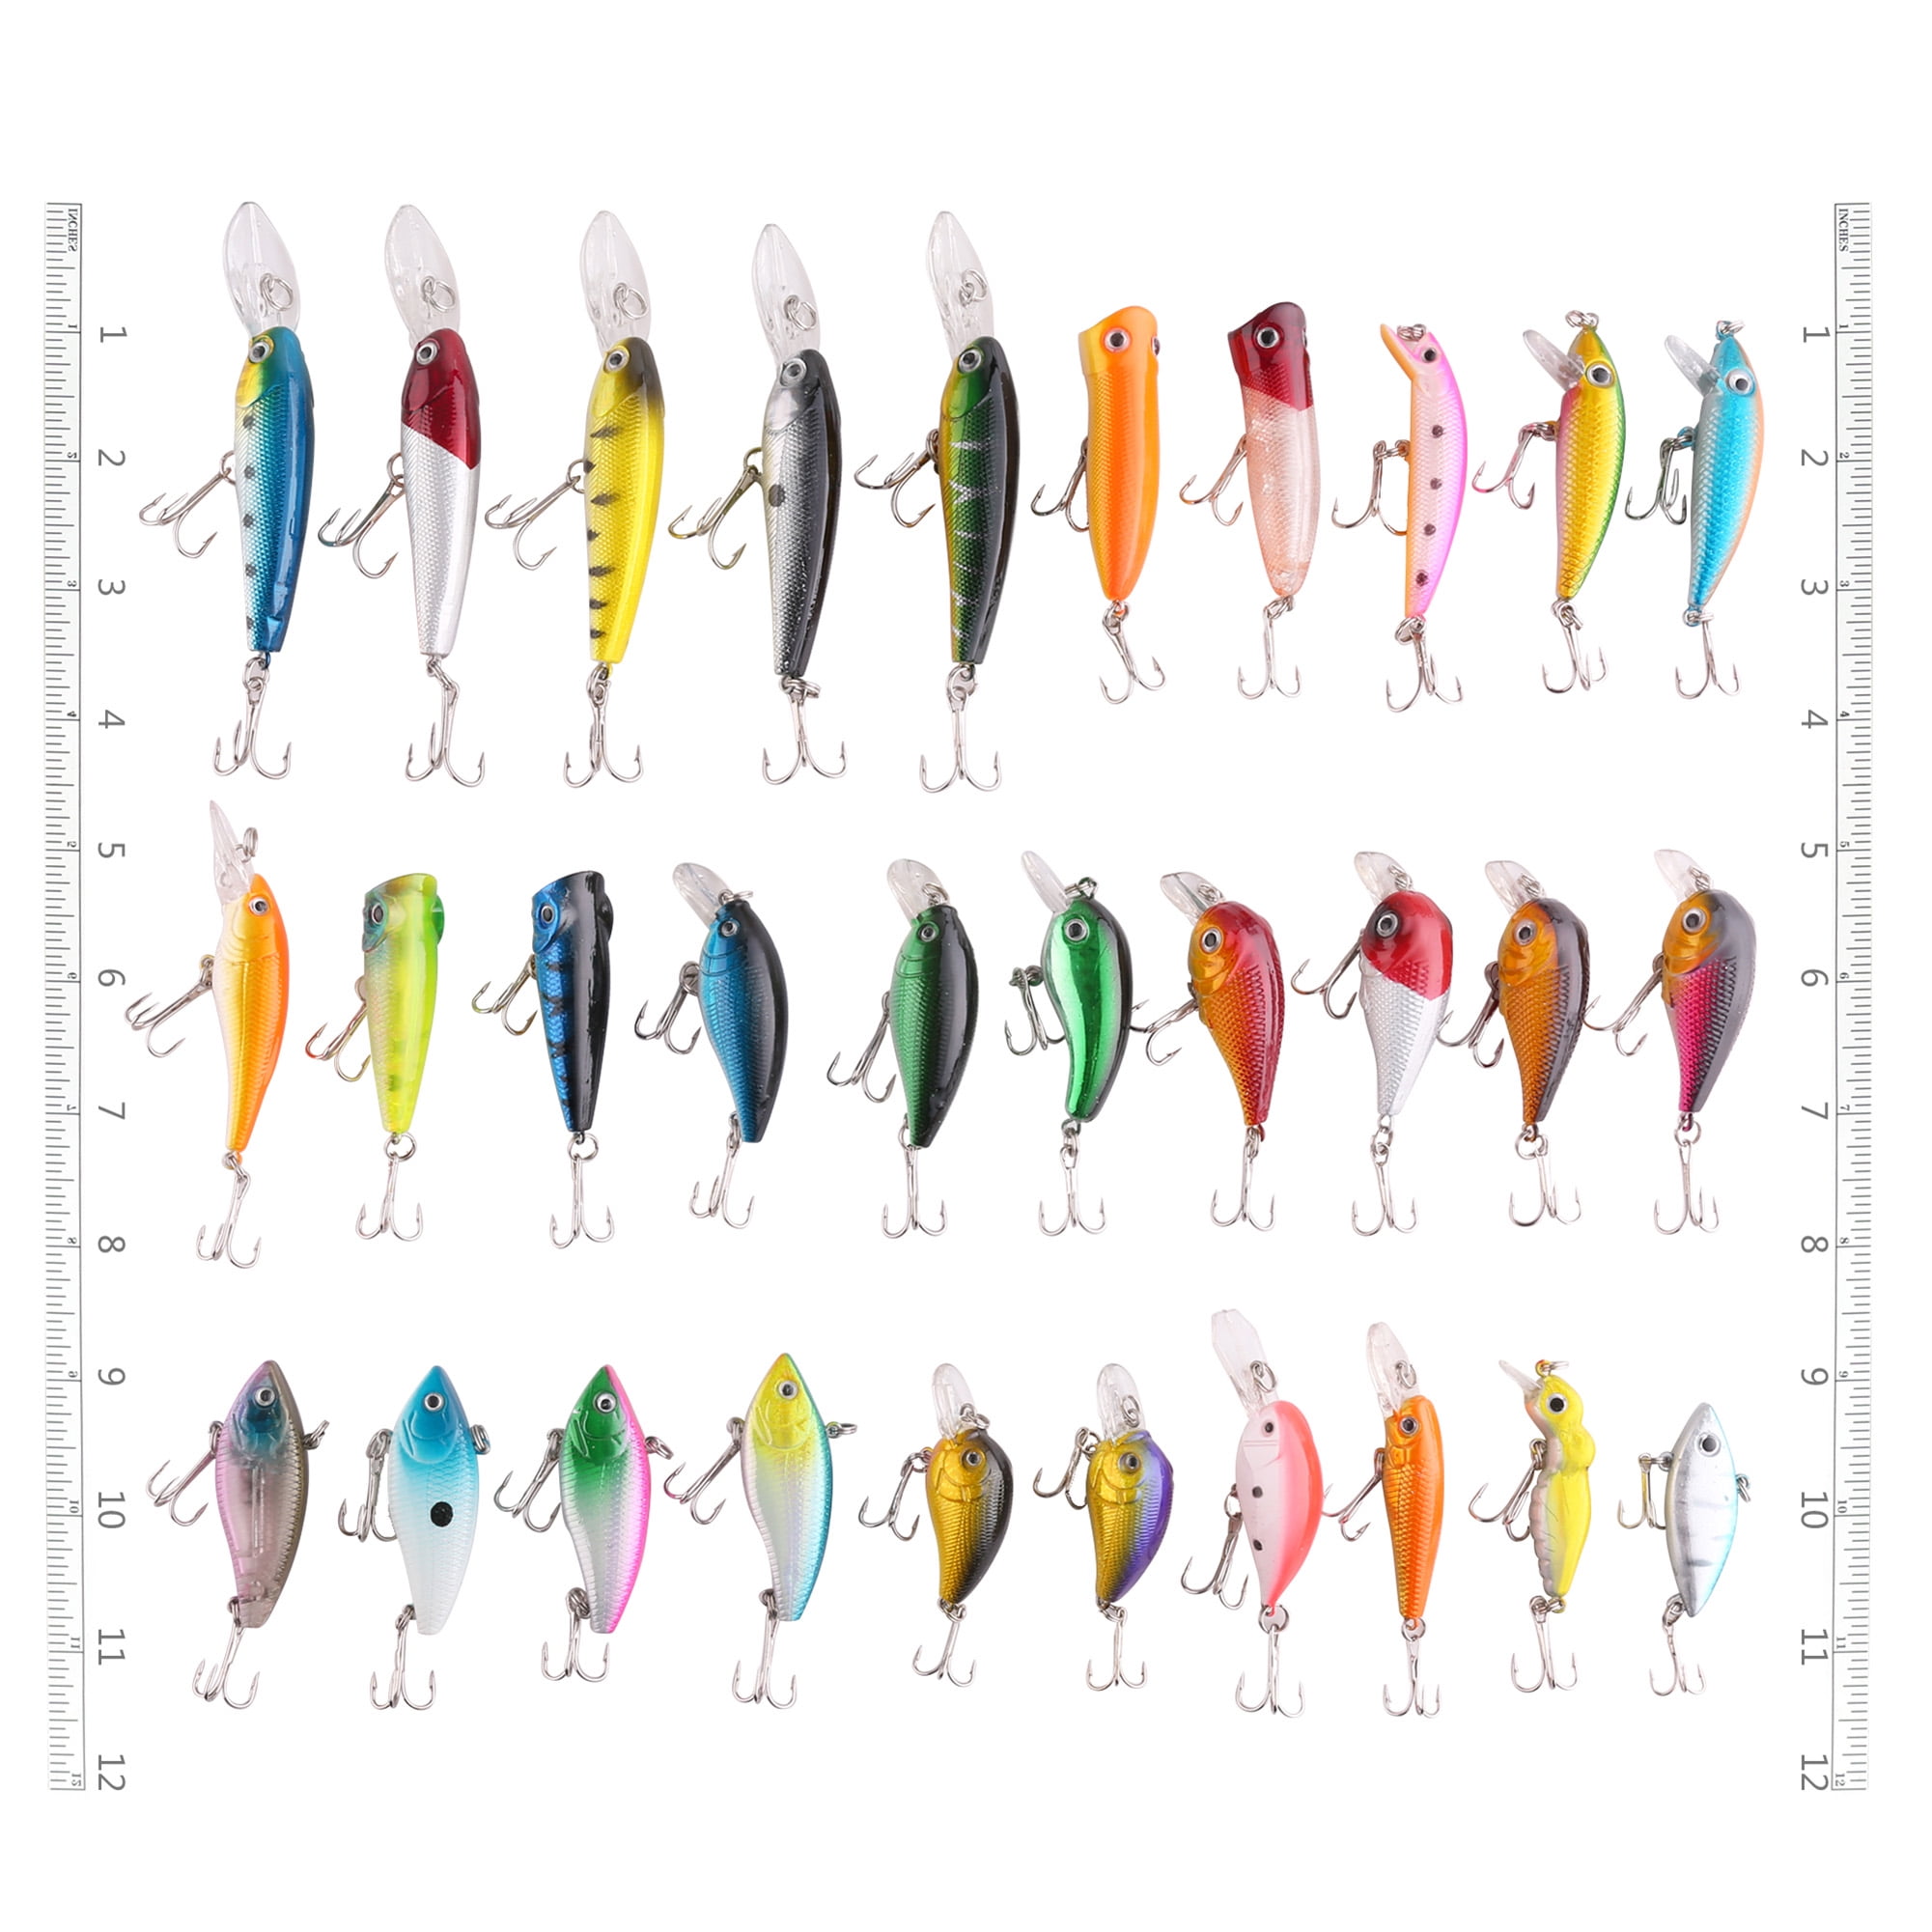 LotFancy 129 Pcs Fishing Lures, Topwater Lures with Treble Hook